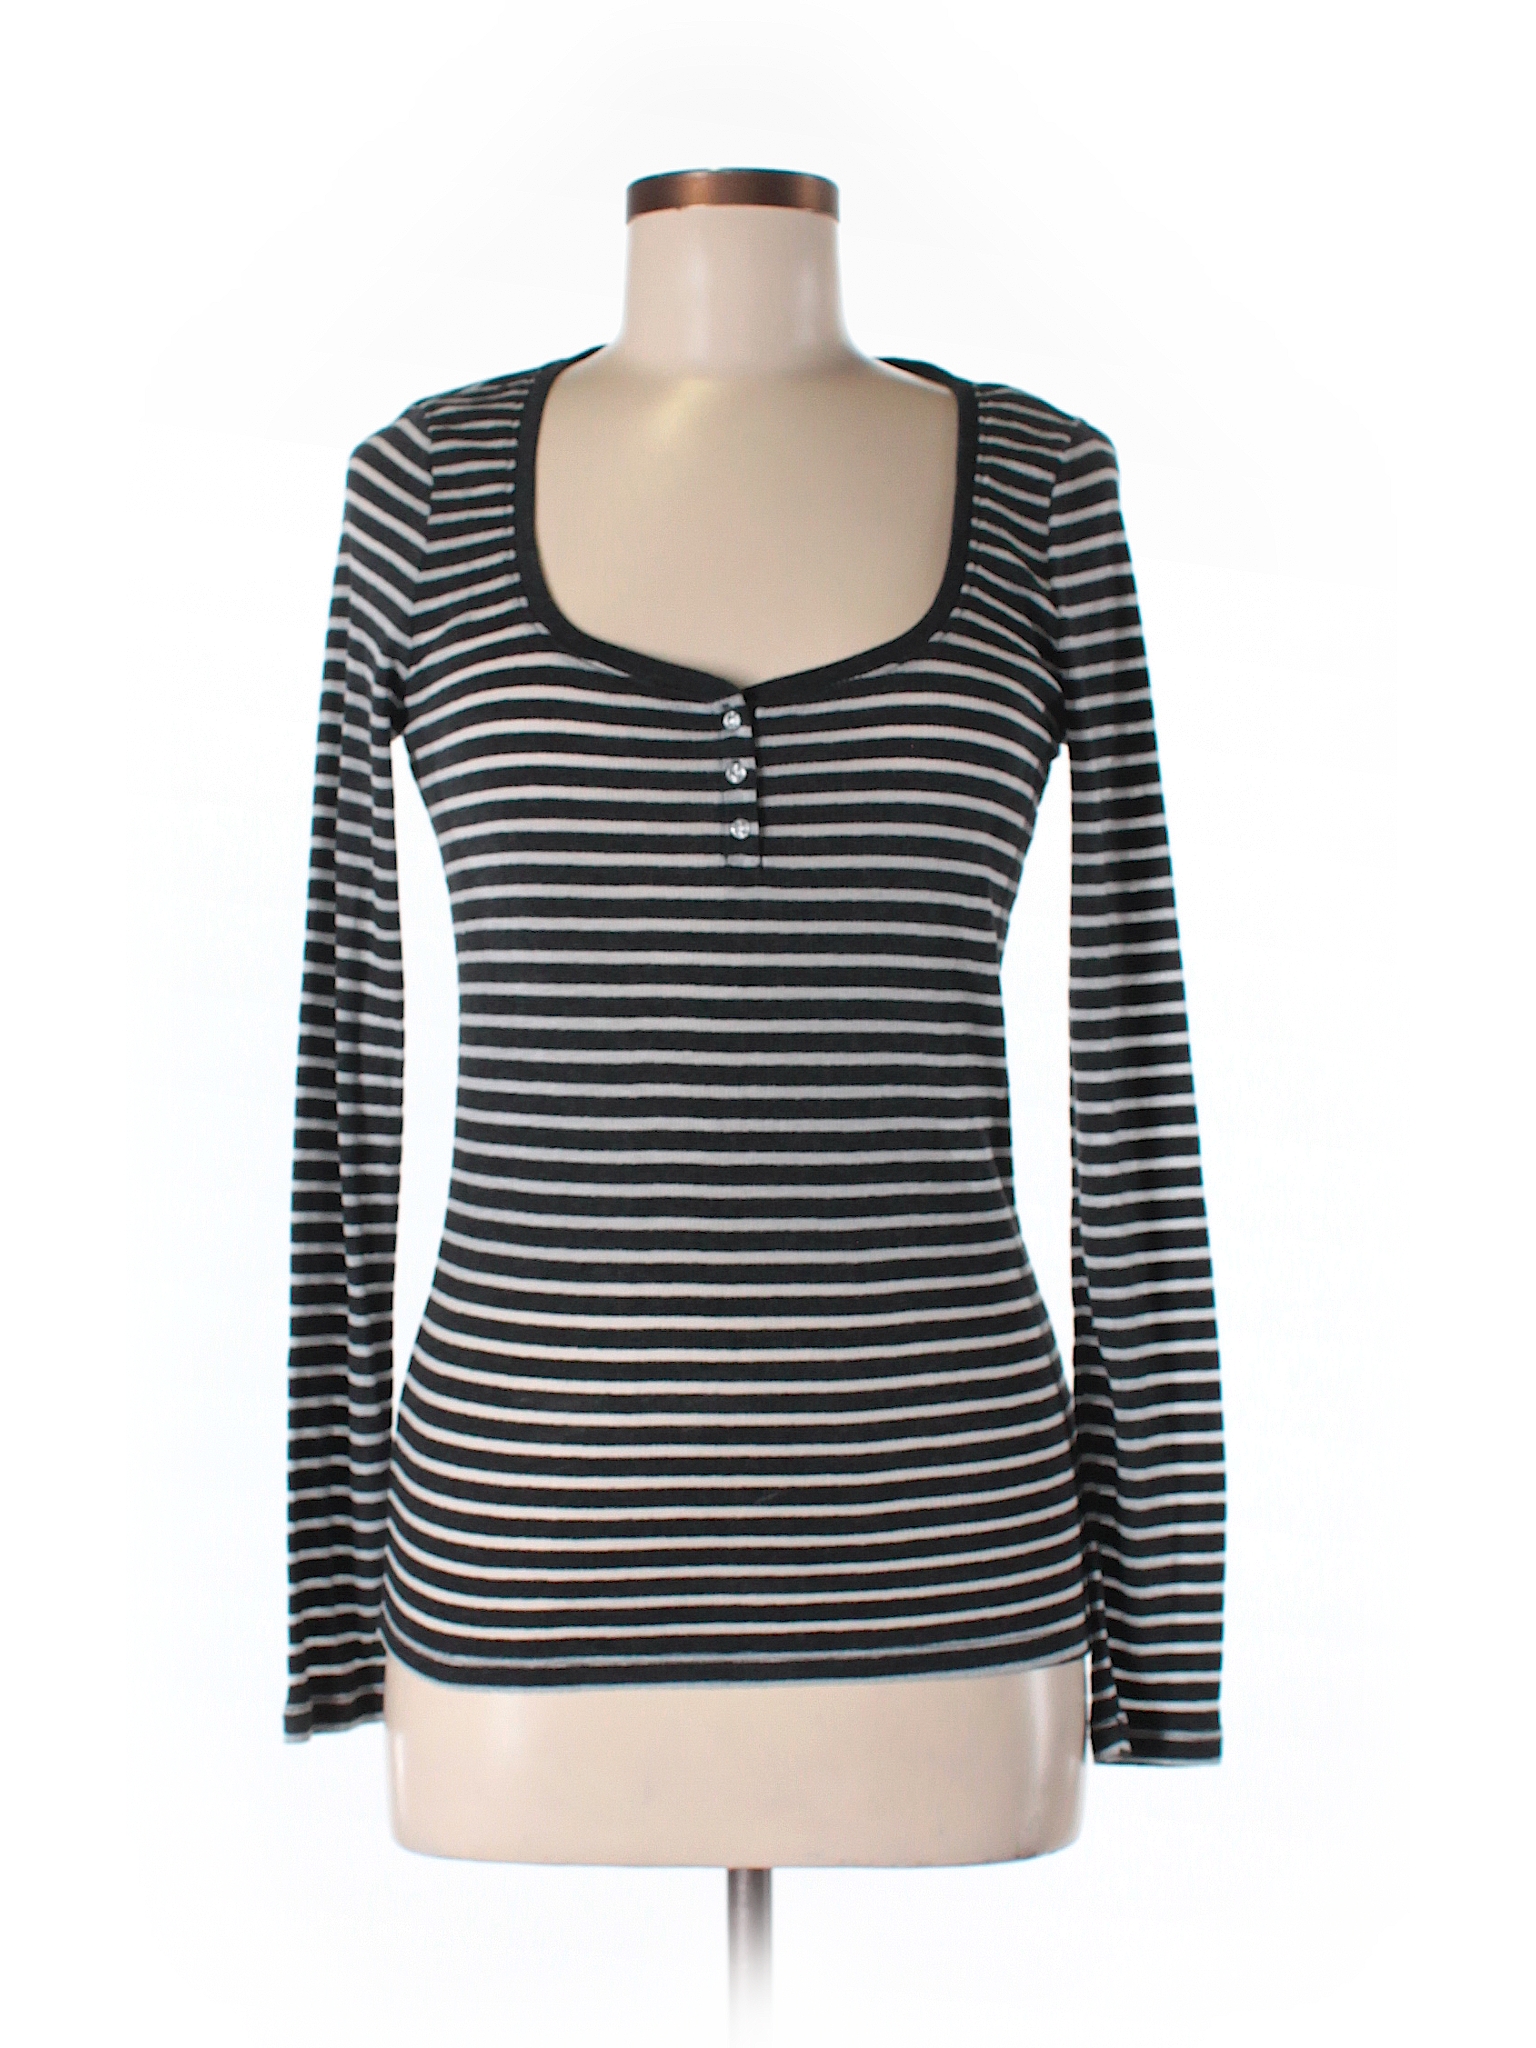 Juicy Couture Stripes Gray Long Sleeve Henley Size M - 86% off | thredUP